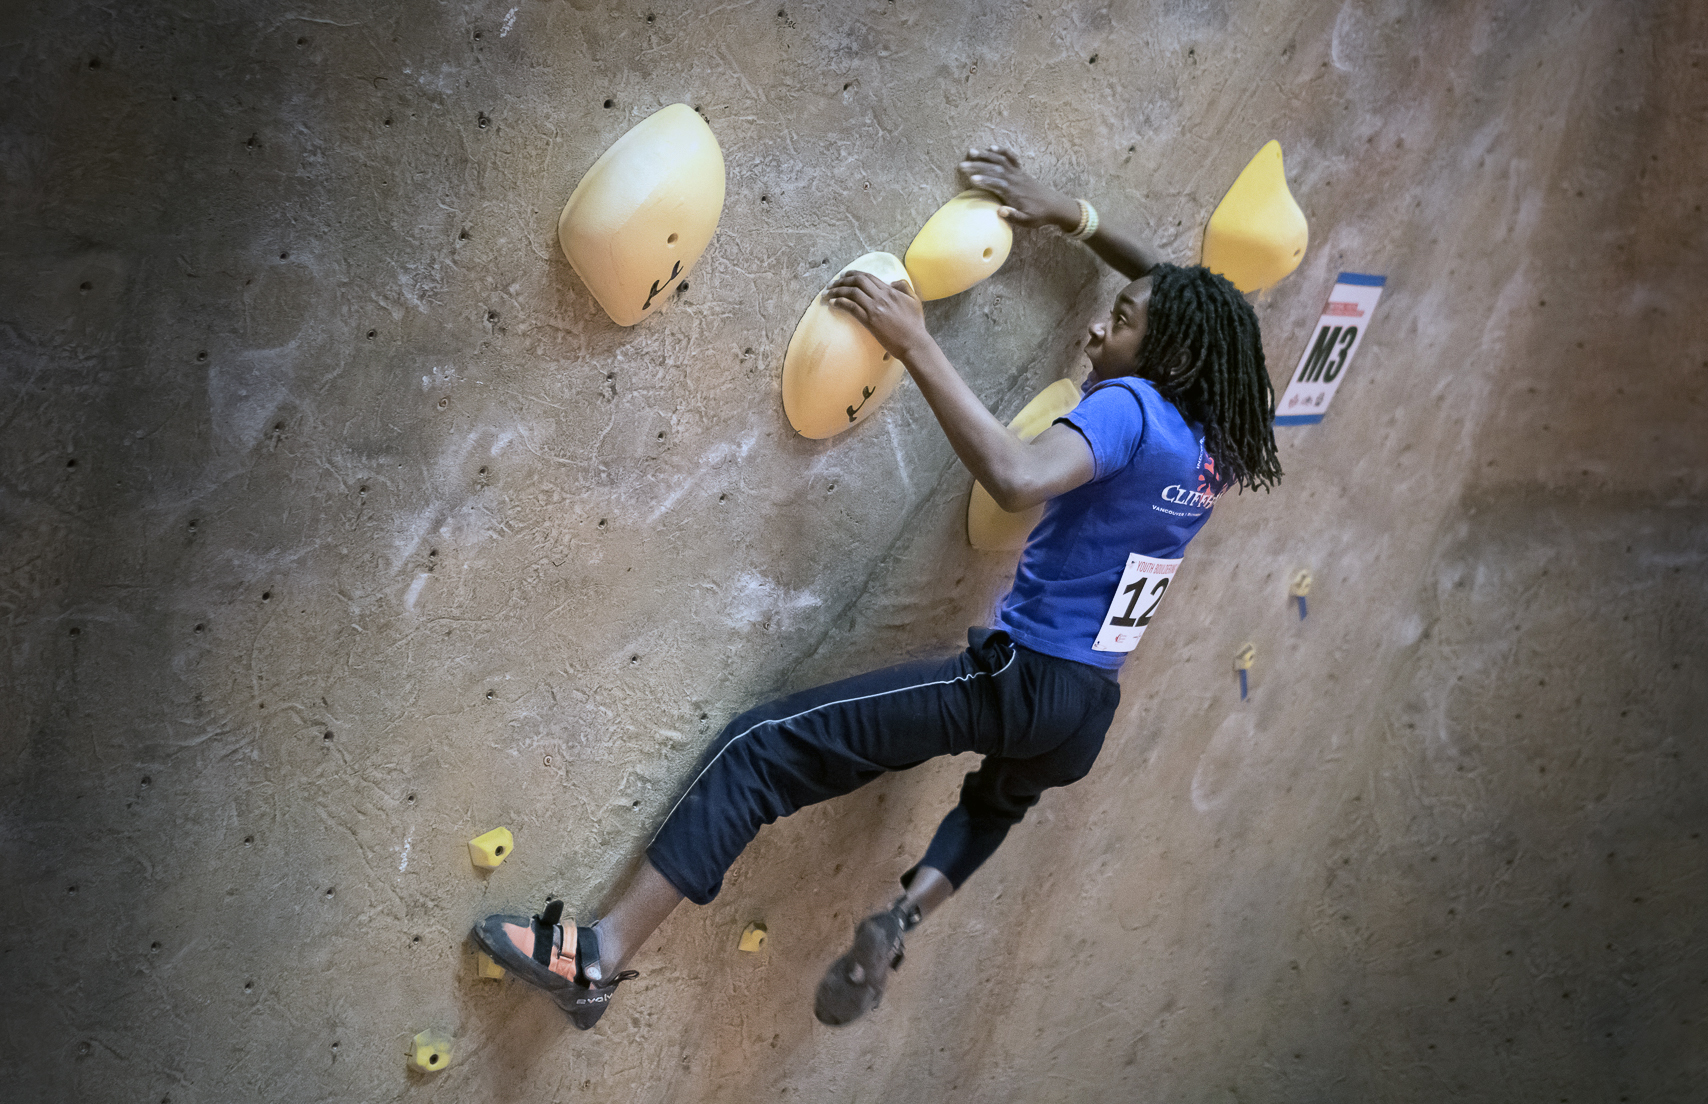 Video: Youth Bouldering Canada - 2015 Nationals Highlights - Gripped ...